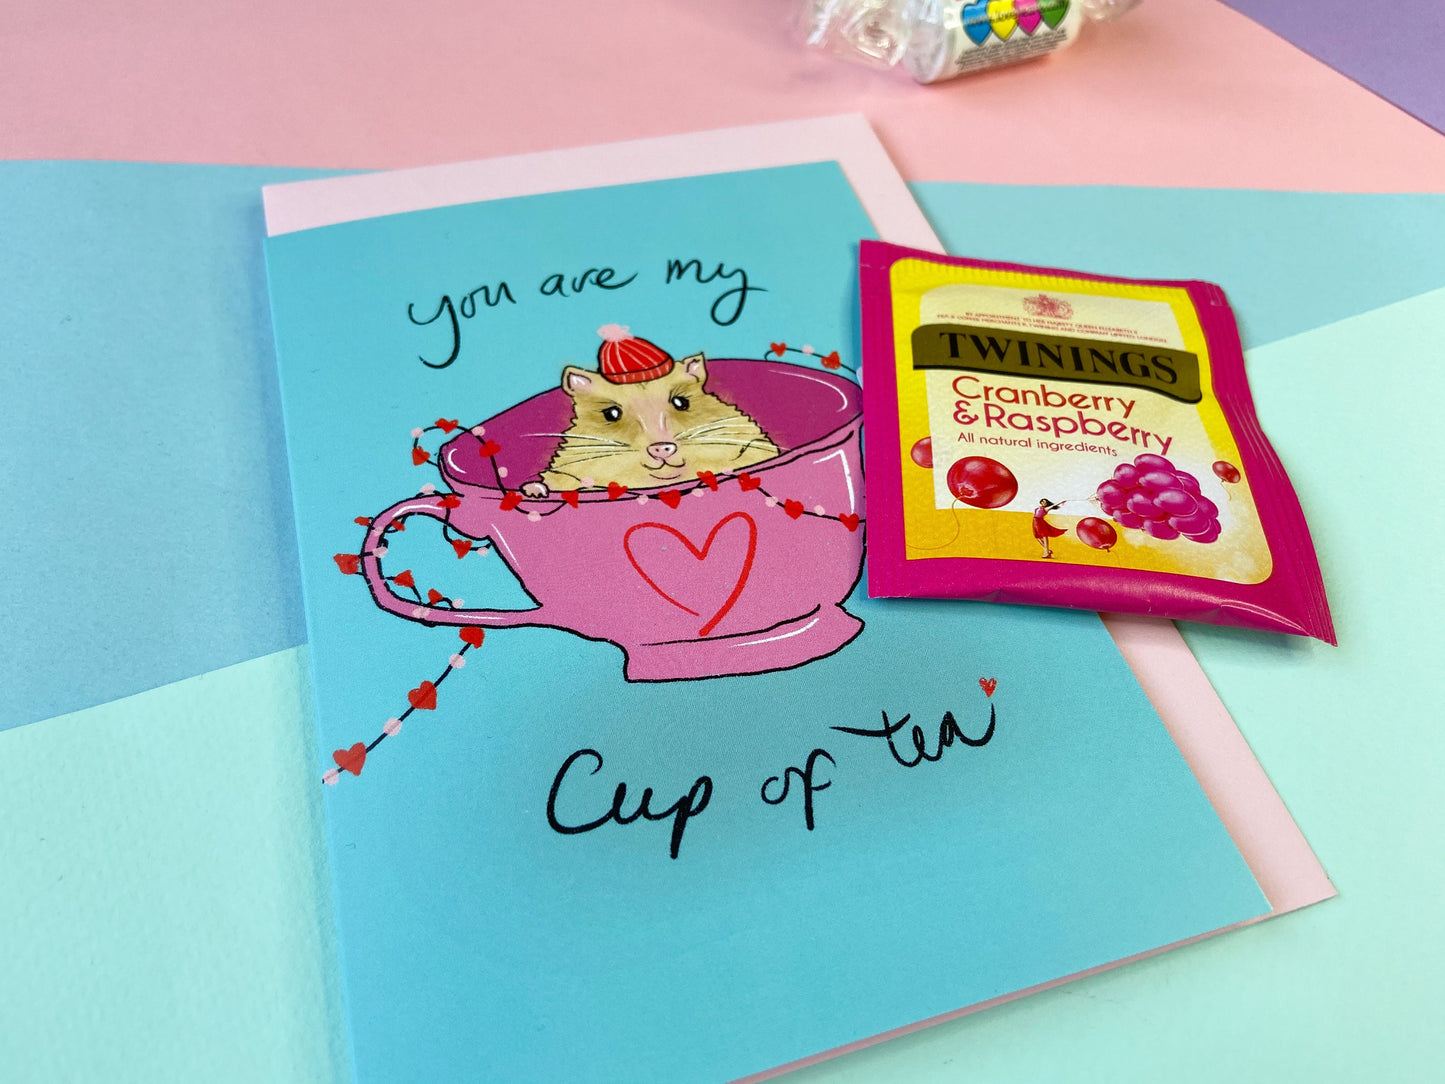 You are my Cup of Tea Card